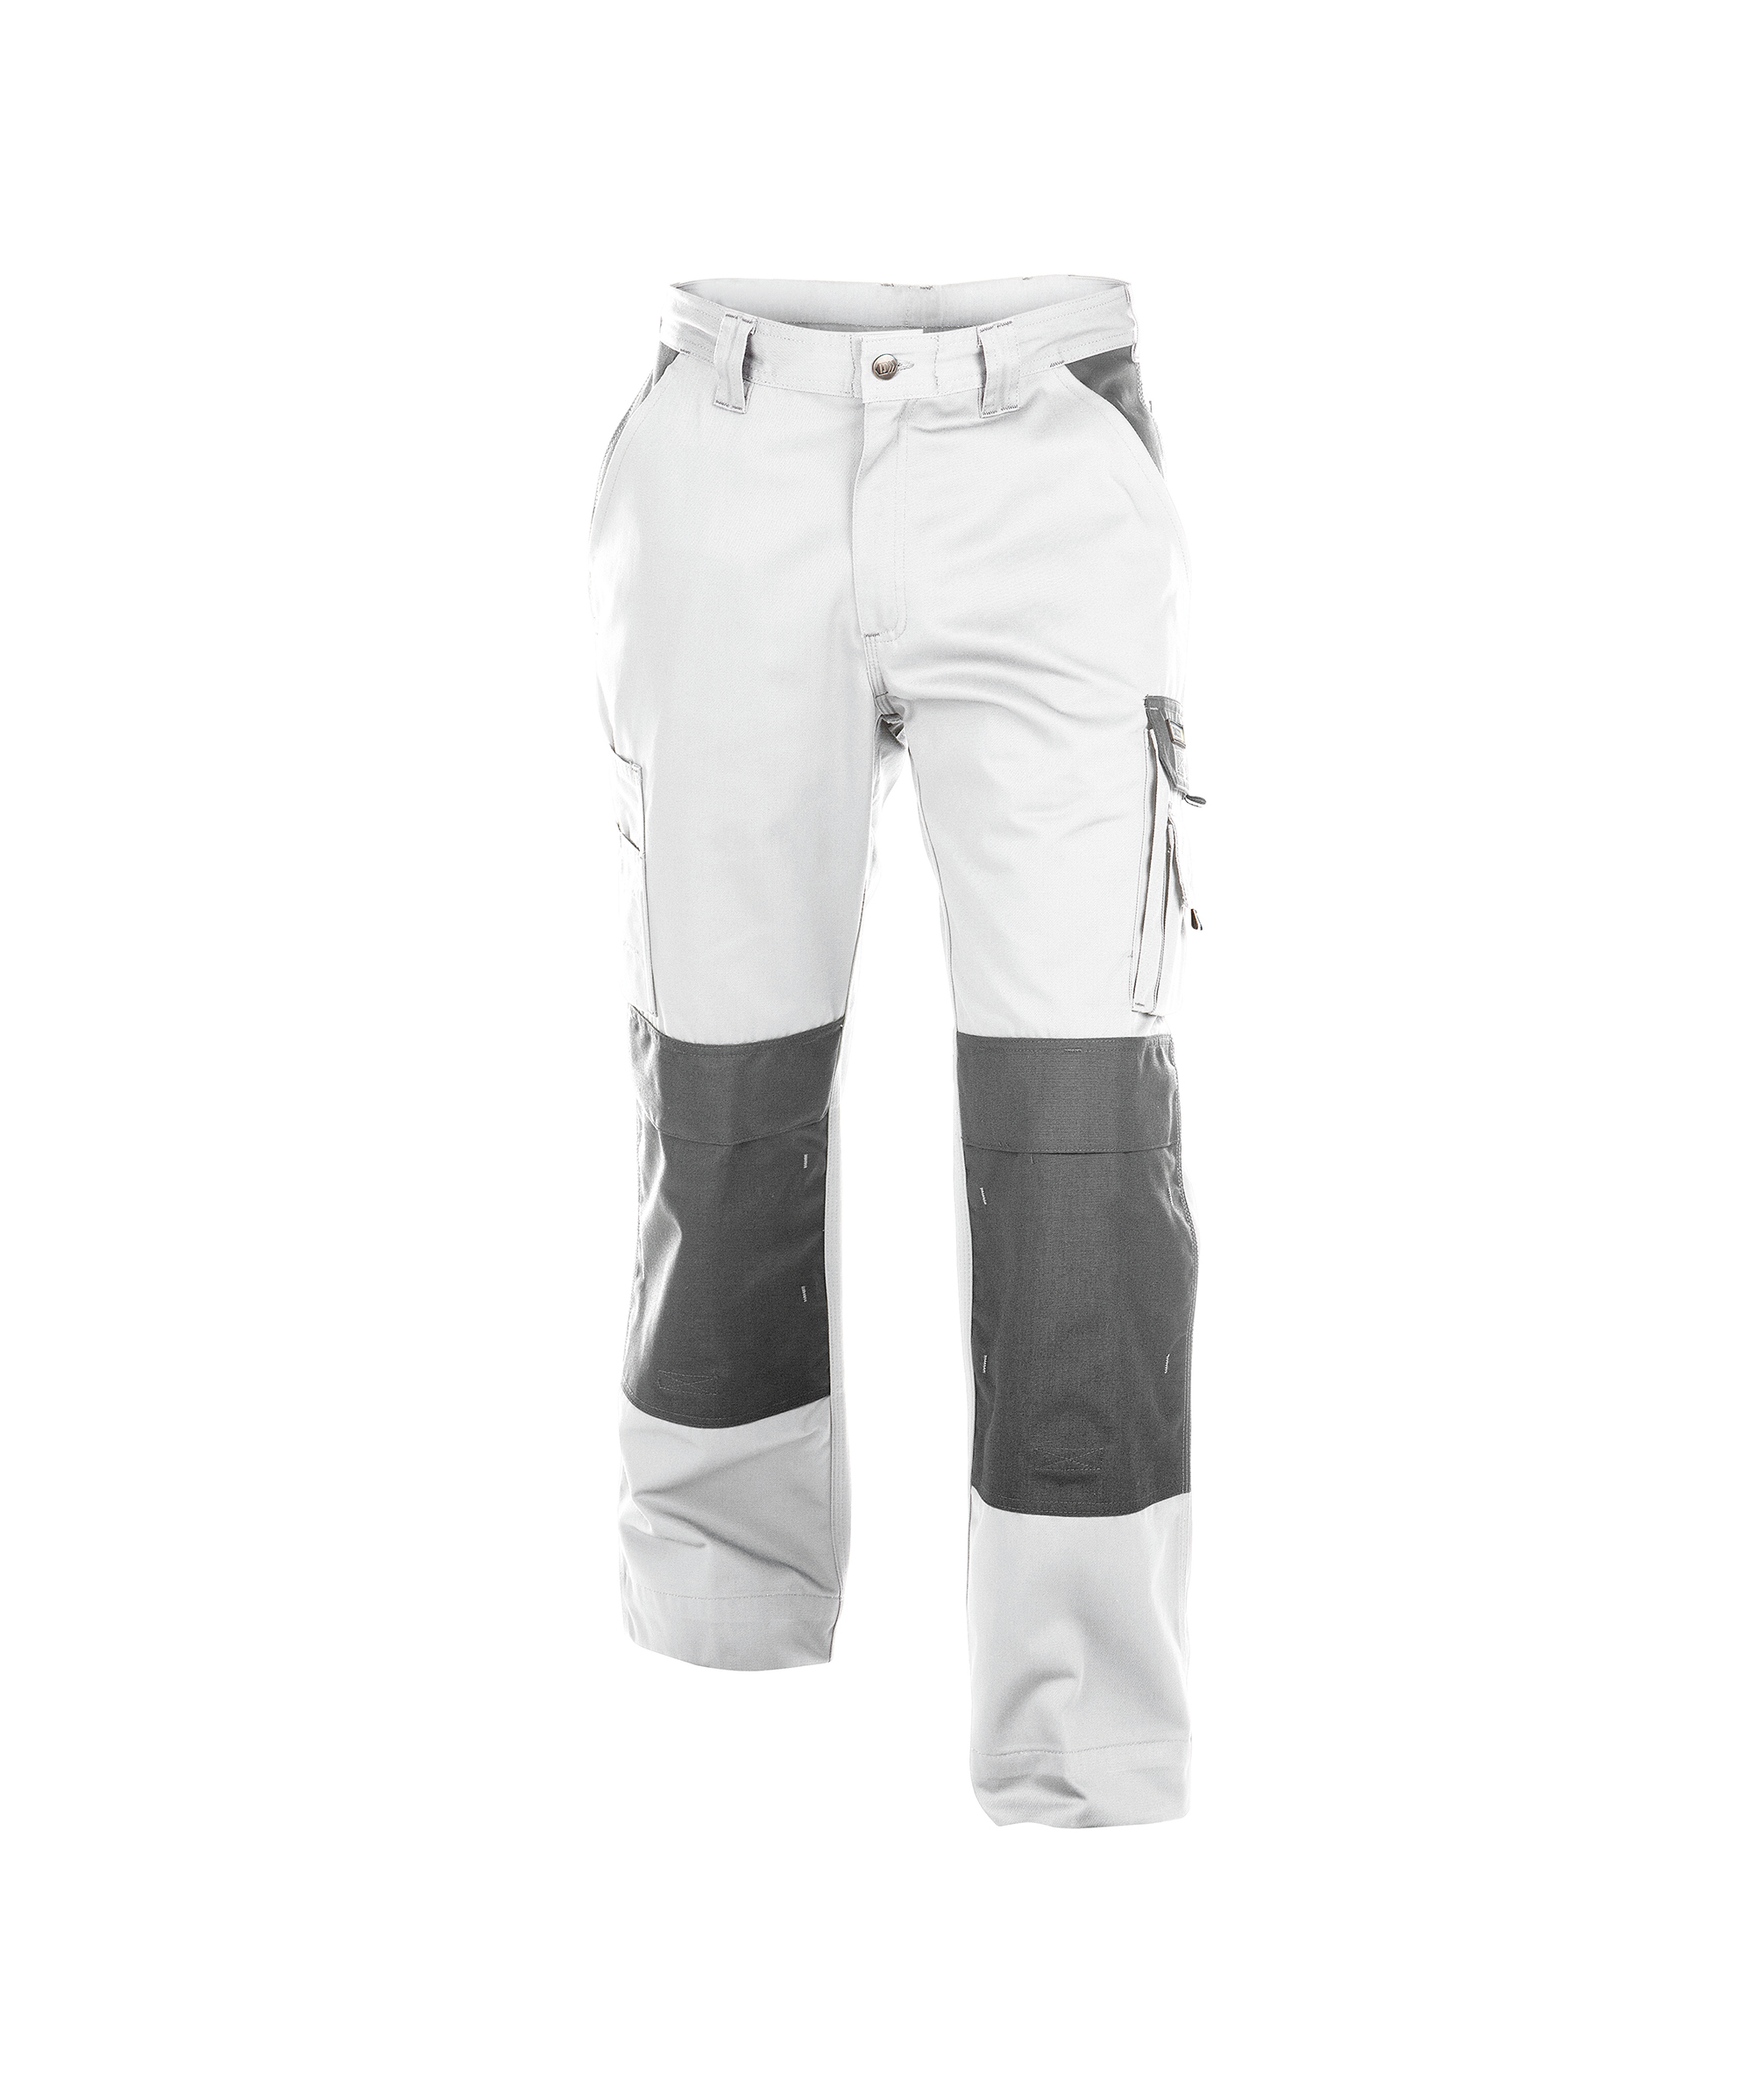 boston_two-tone-work-trousers-with-knee-pockets_white-cement-grey_front.jpg